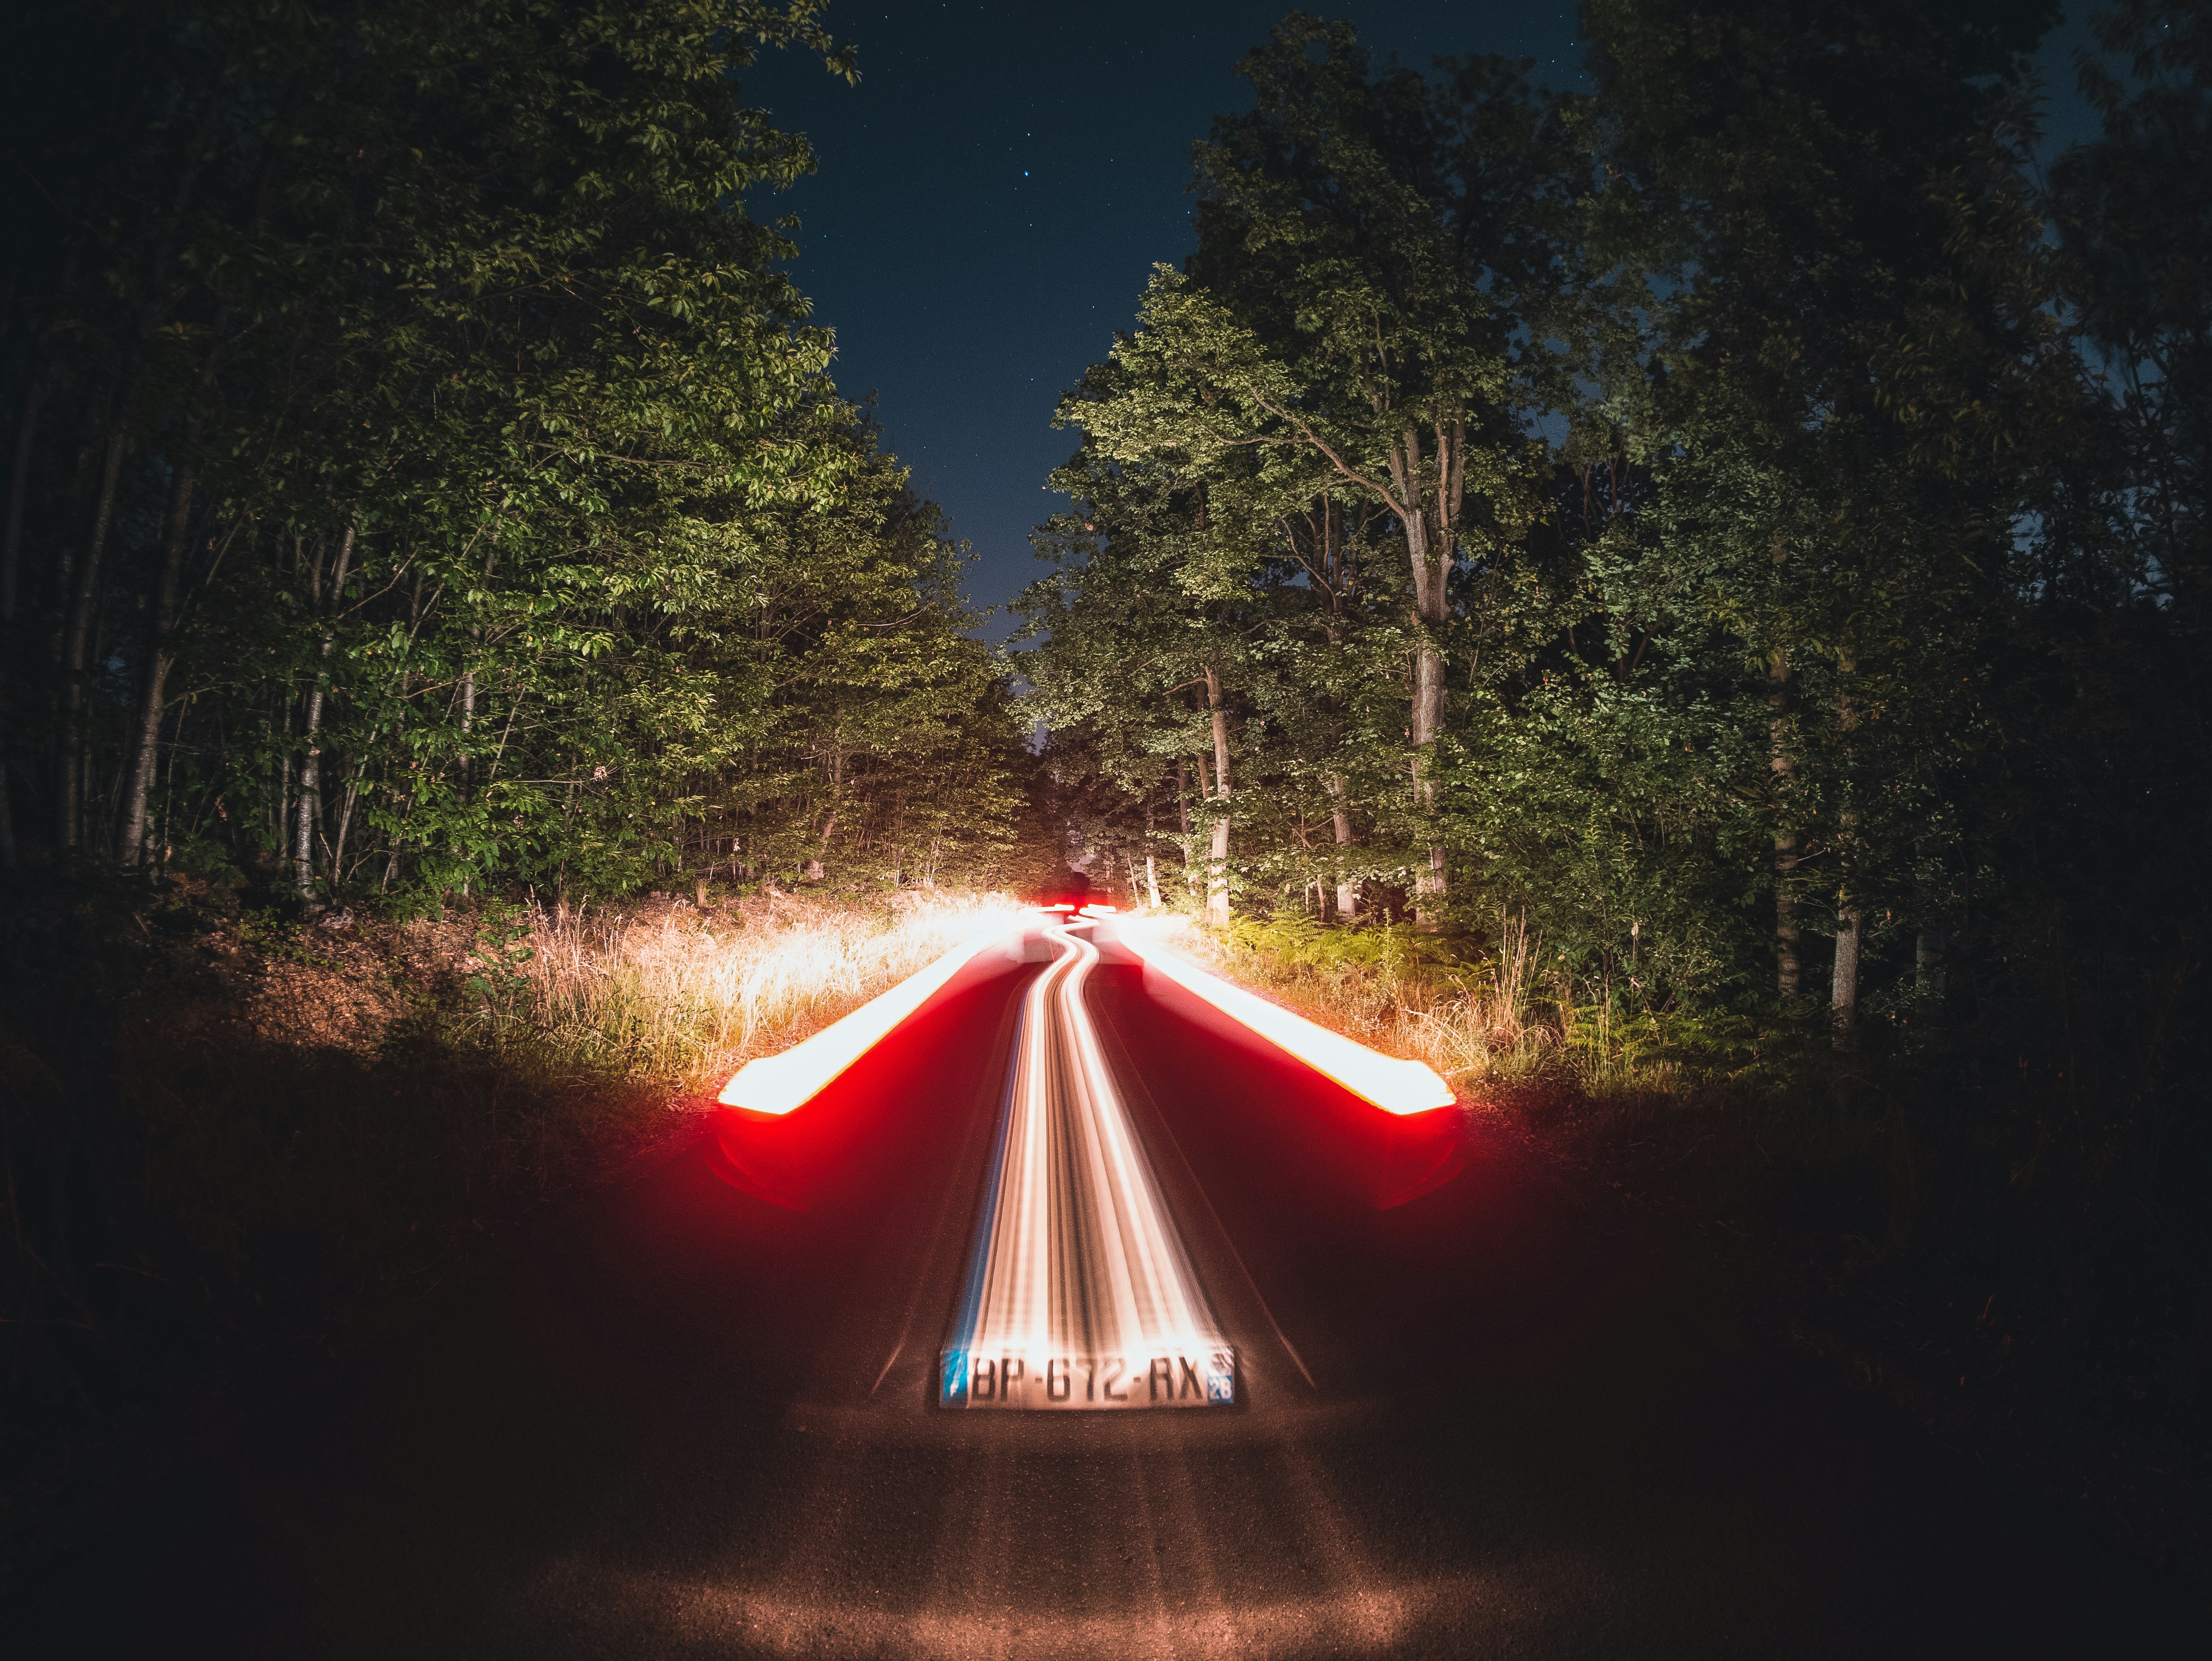 red-and-white-light-on-road-during-night-time